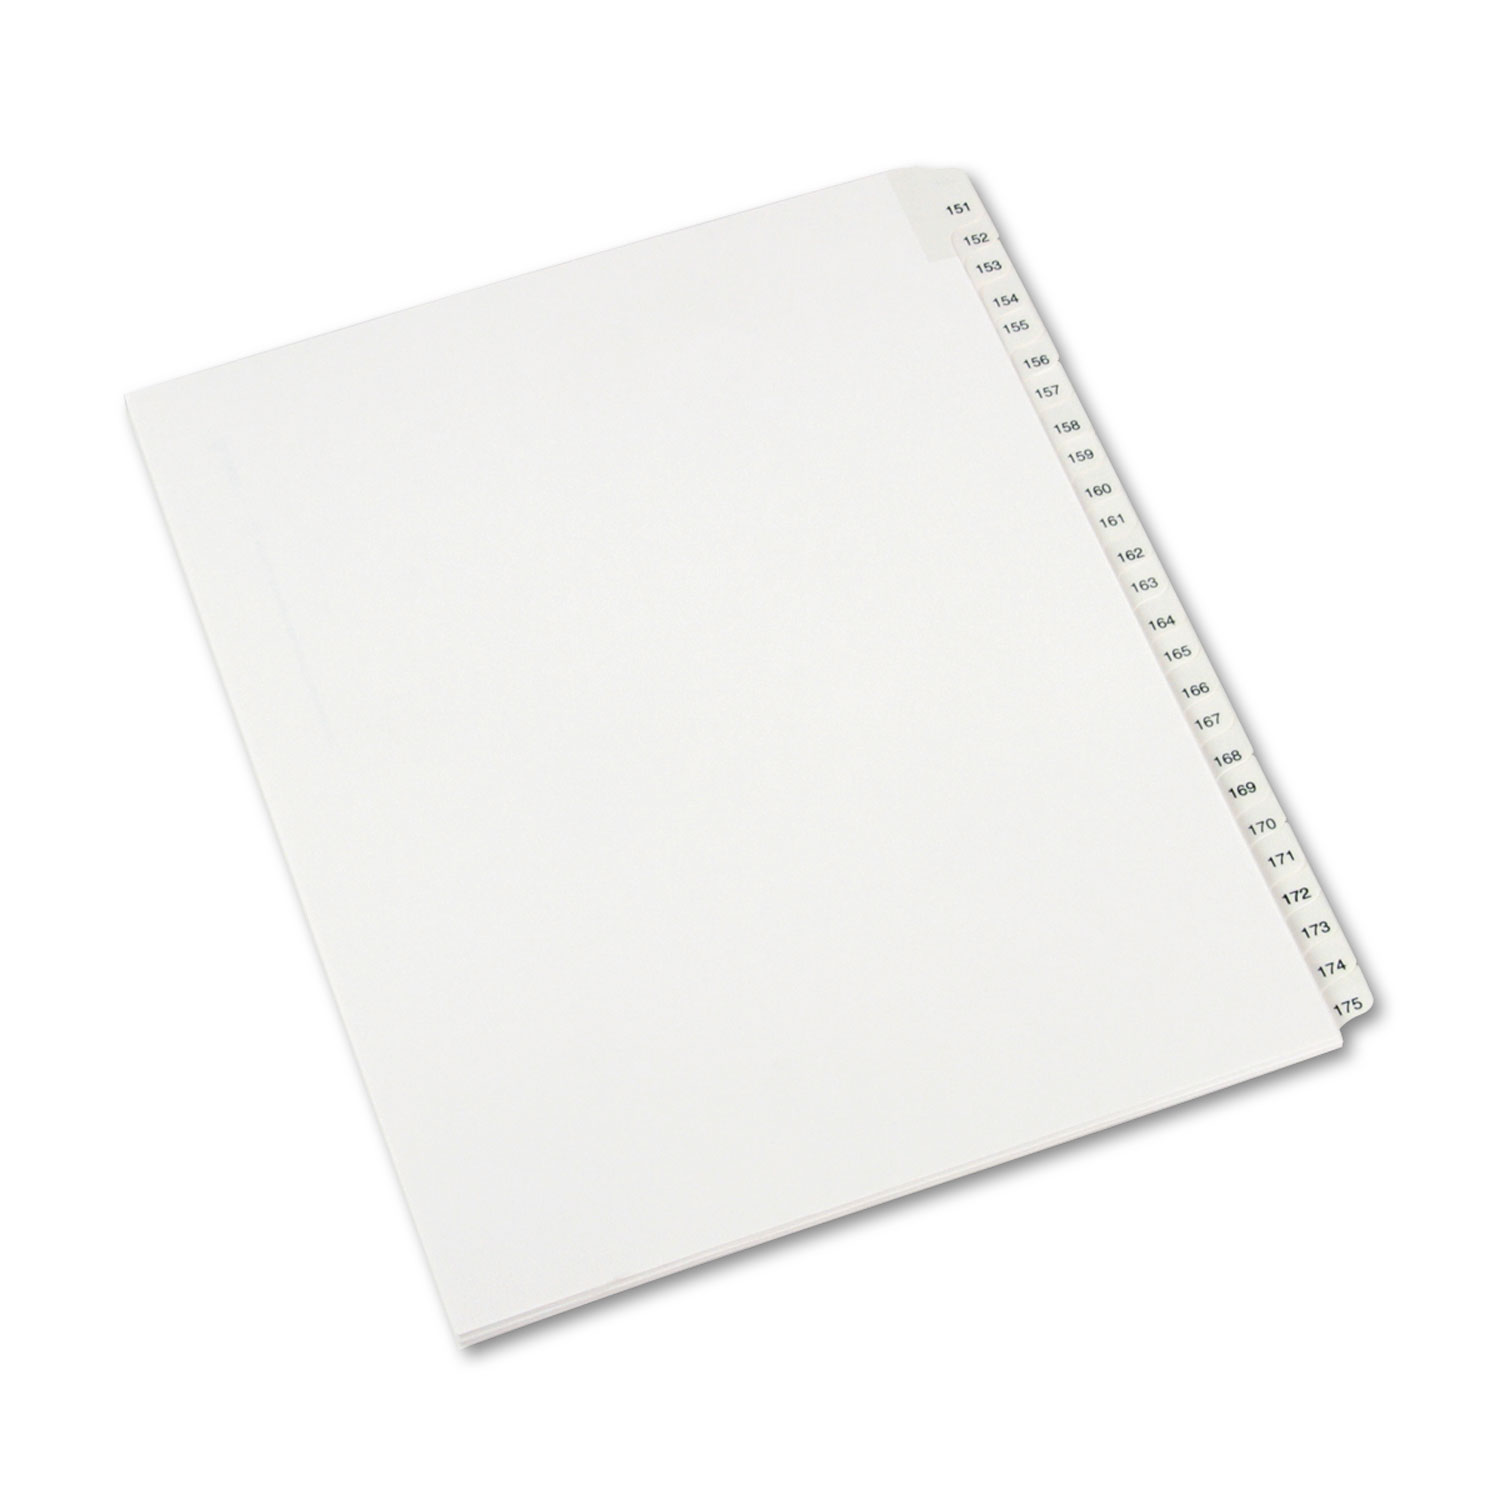  Avery 82189 Preprinted Legal Exhibit Side Tab Index Dividers, Allstate Style, 25-Tab, 151 to 175, 11 x 8.5, White, 1 Set (AVE82189) 